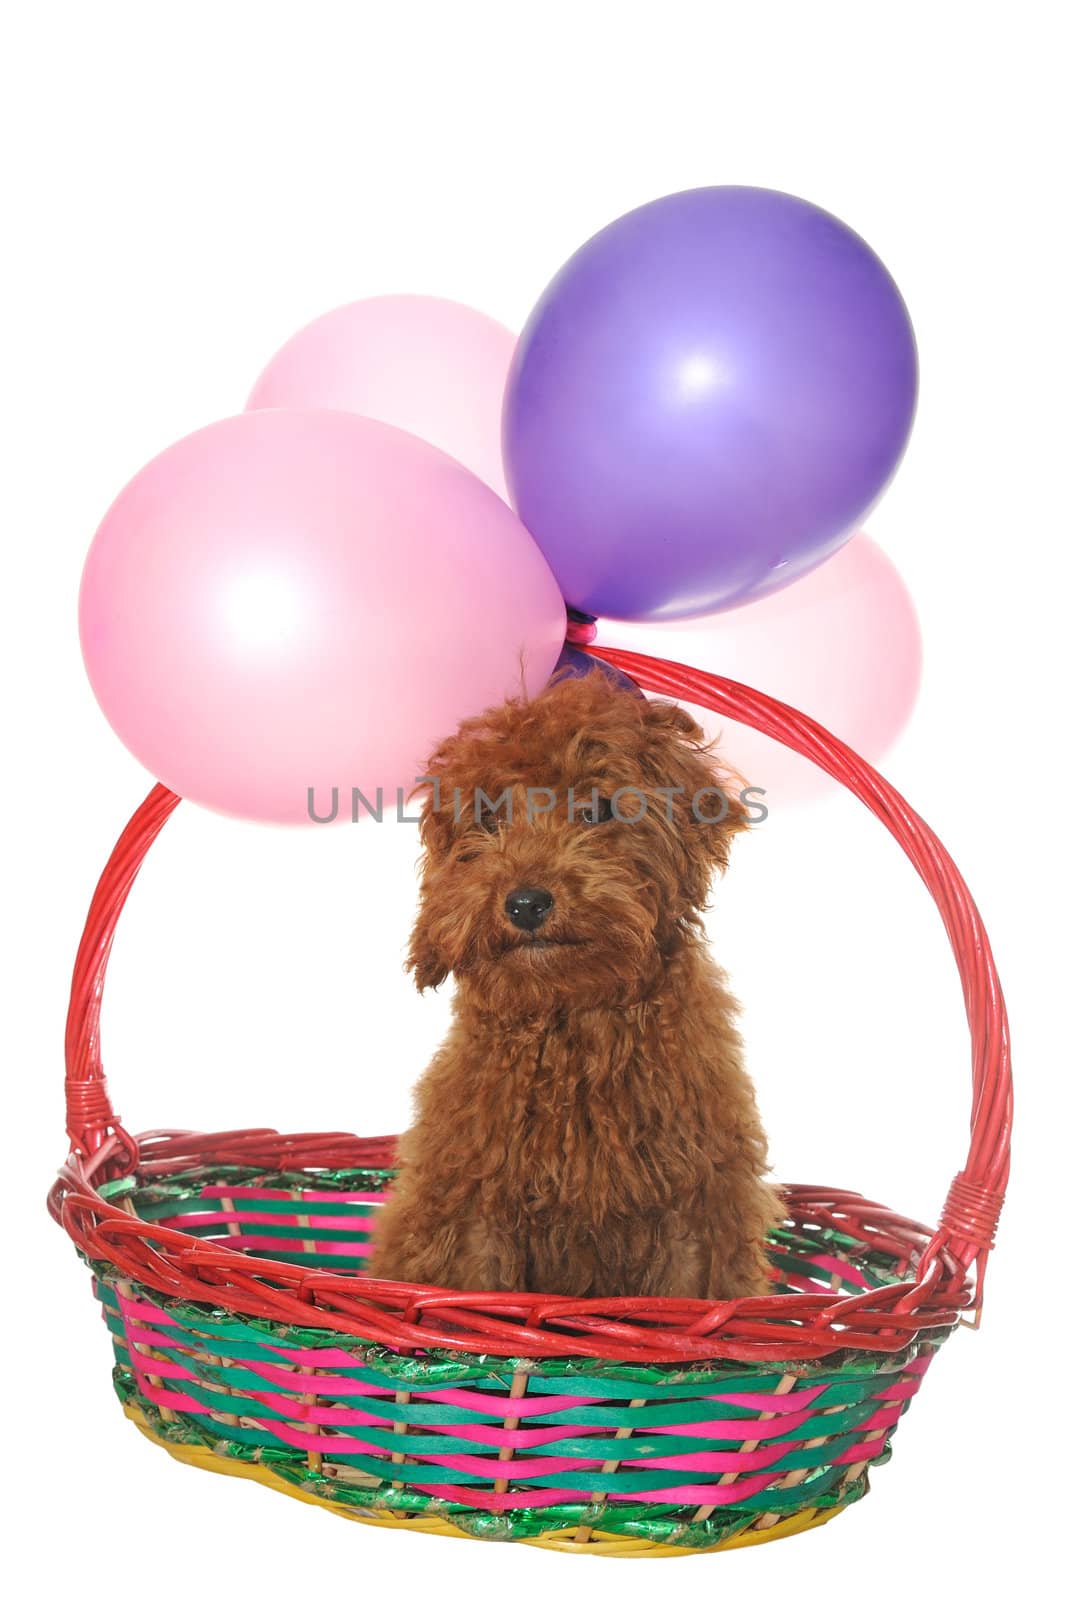 Dog in basket under balloons, isolated on white